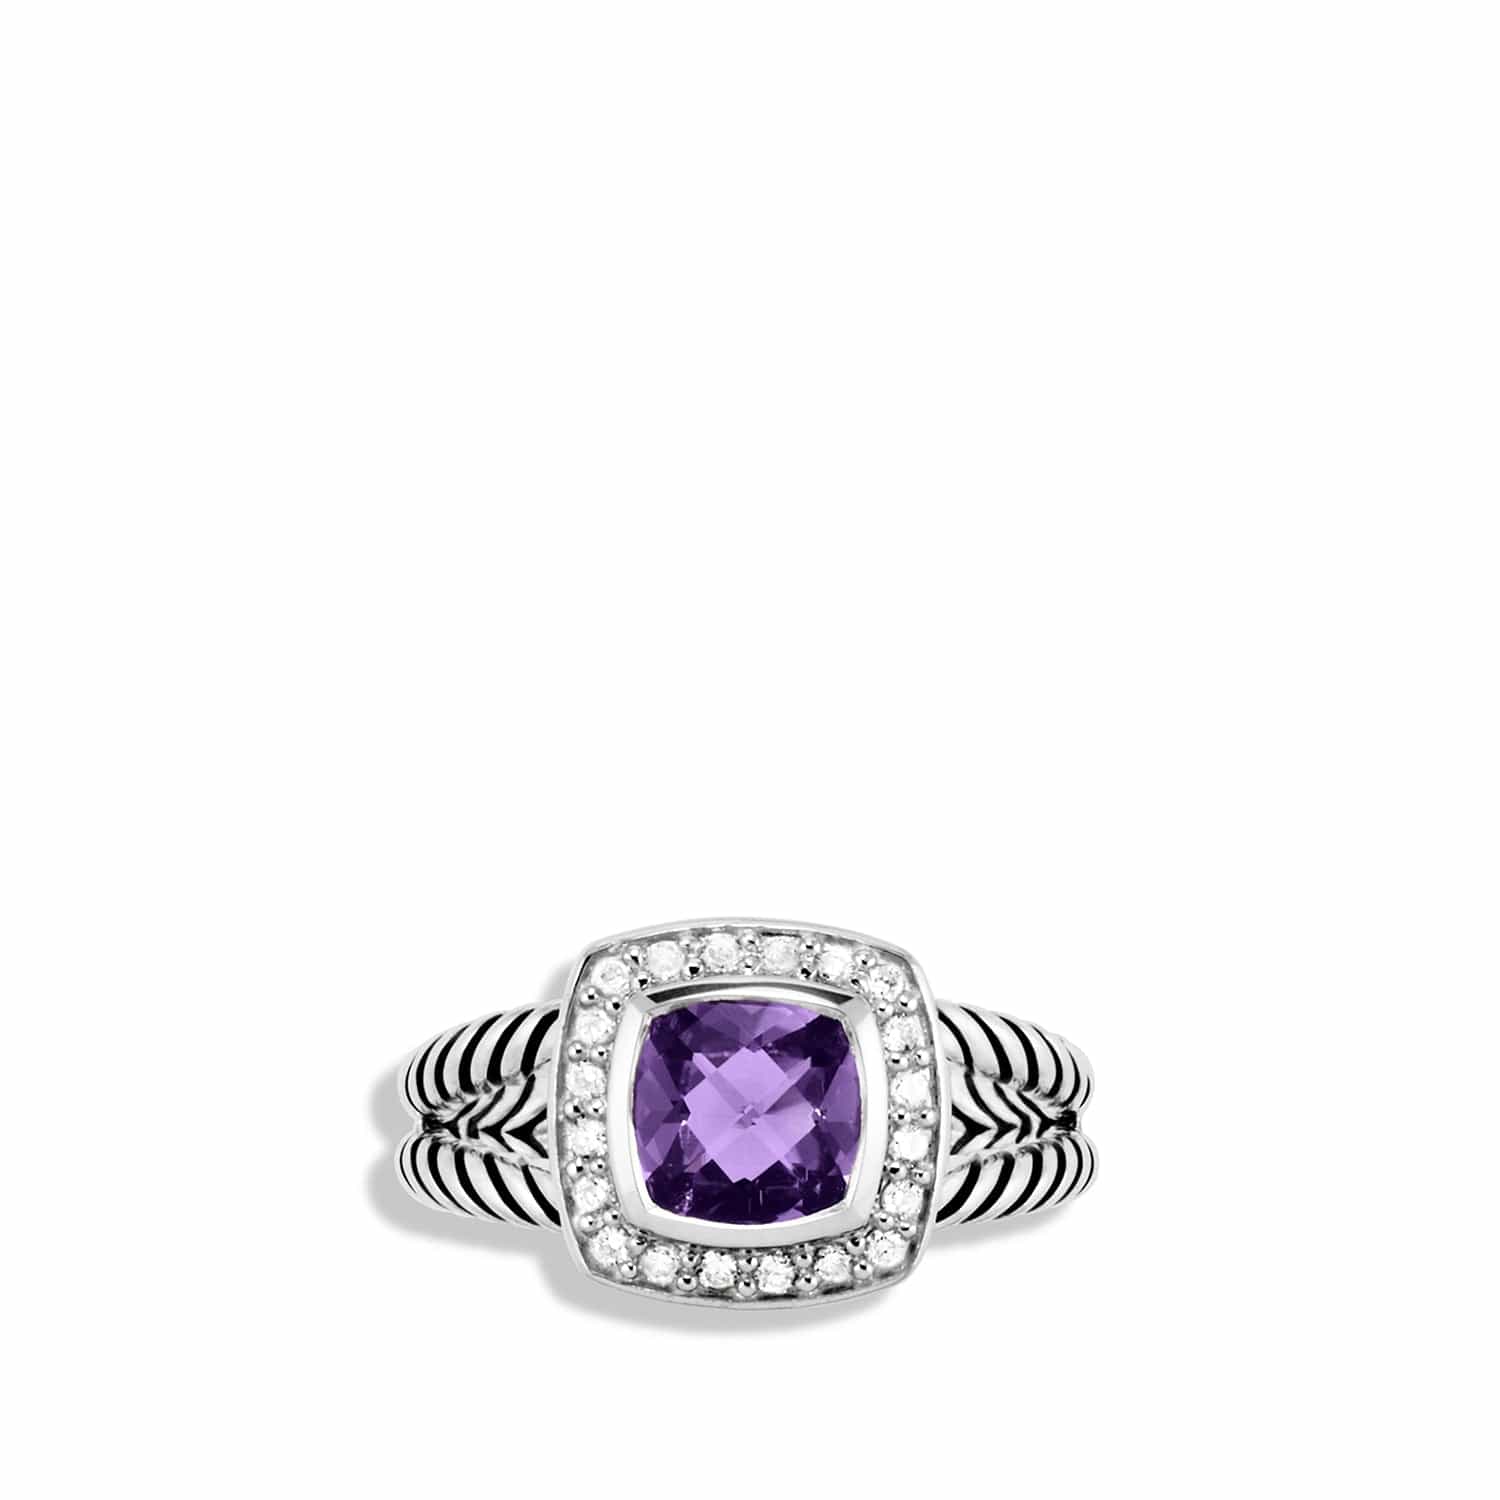 Petite Albion Ring with Black Orchid and Diamonds